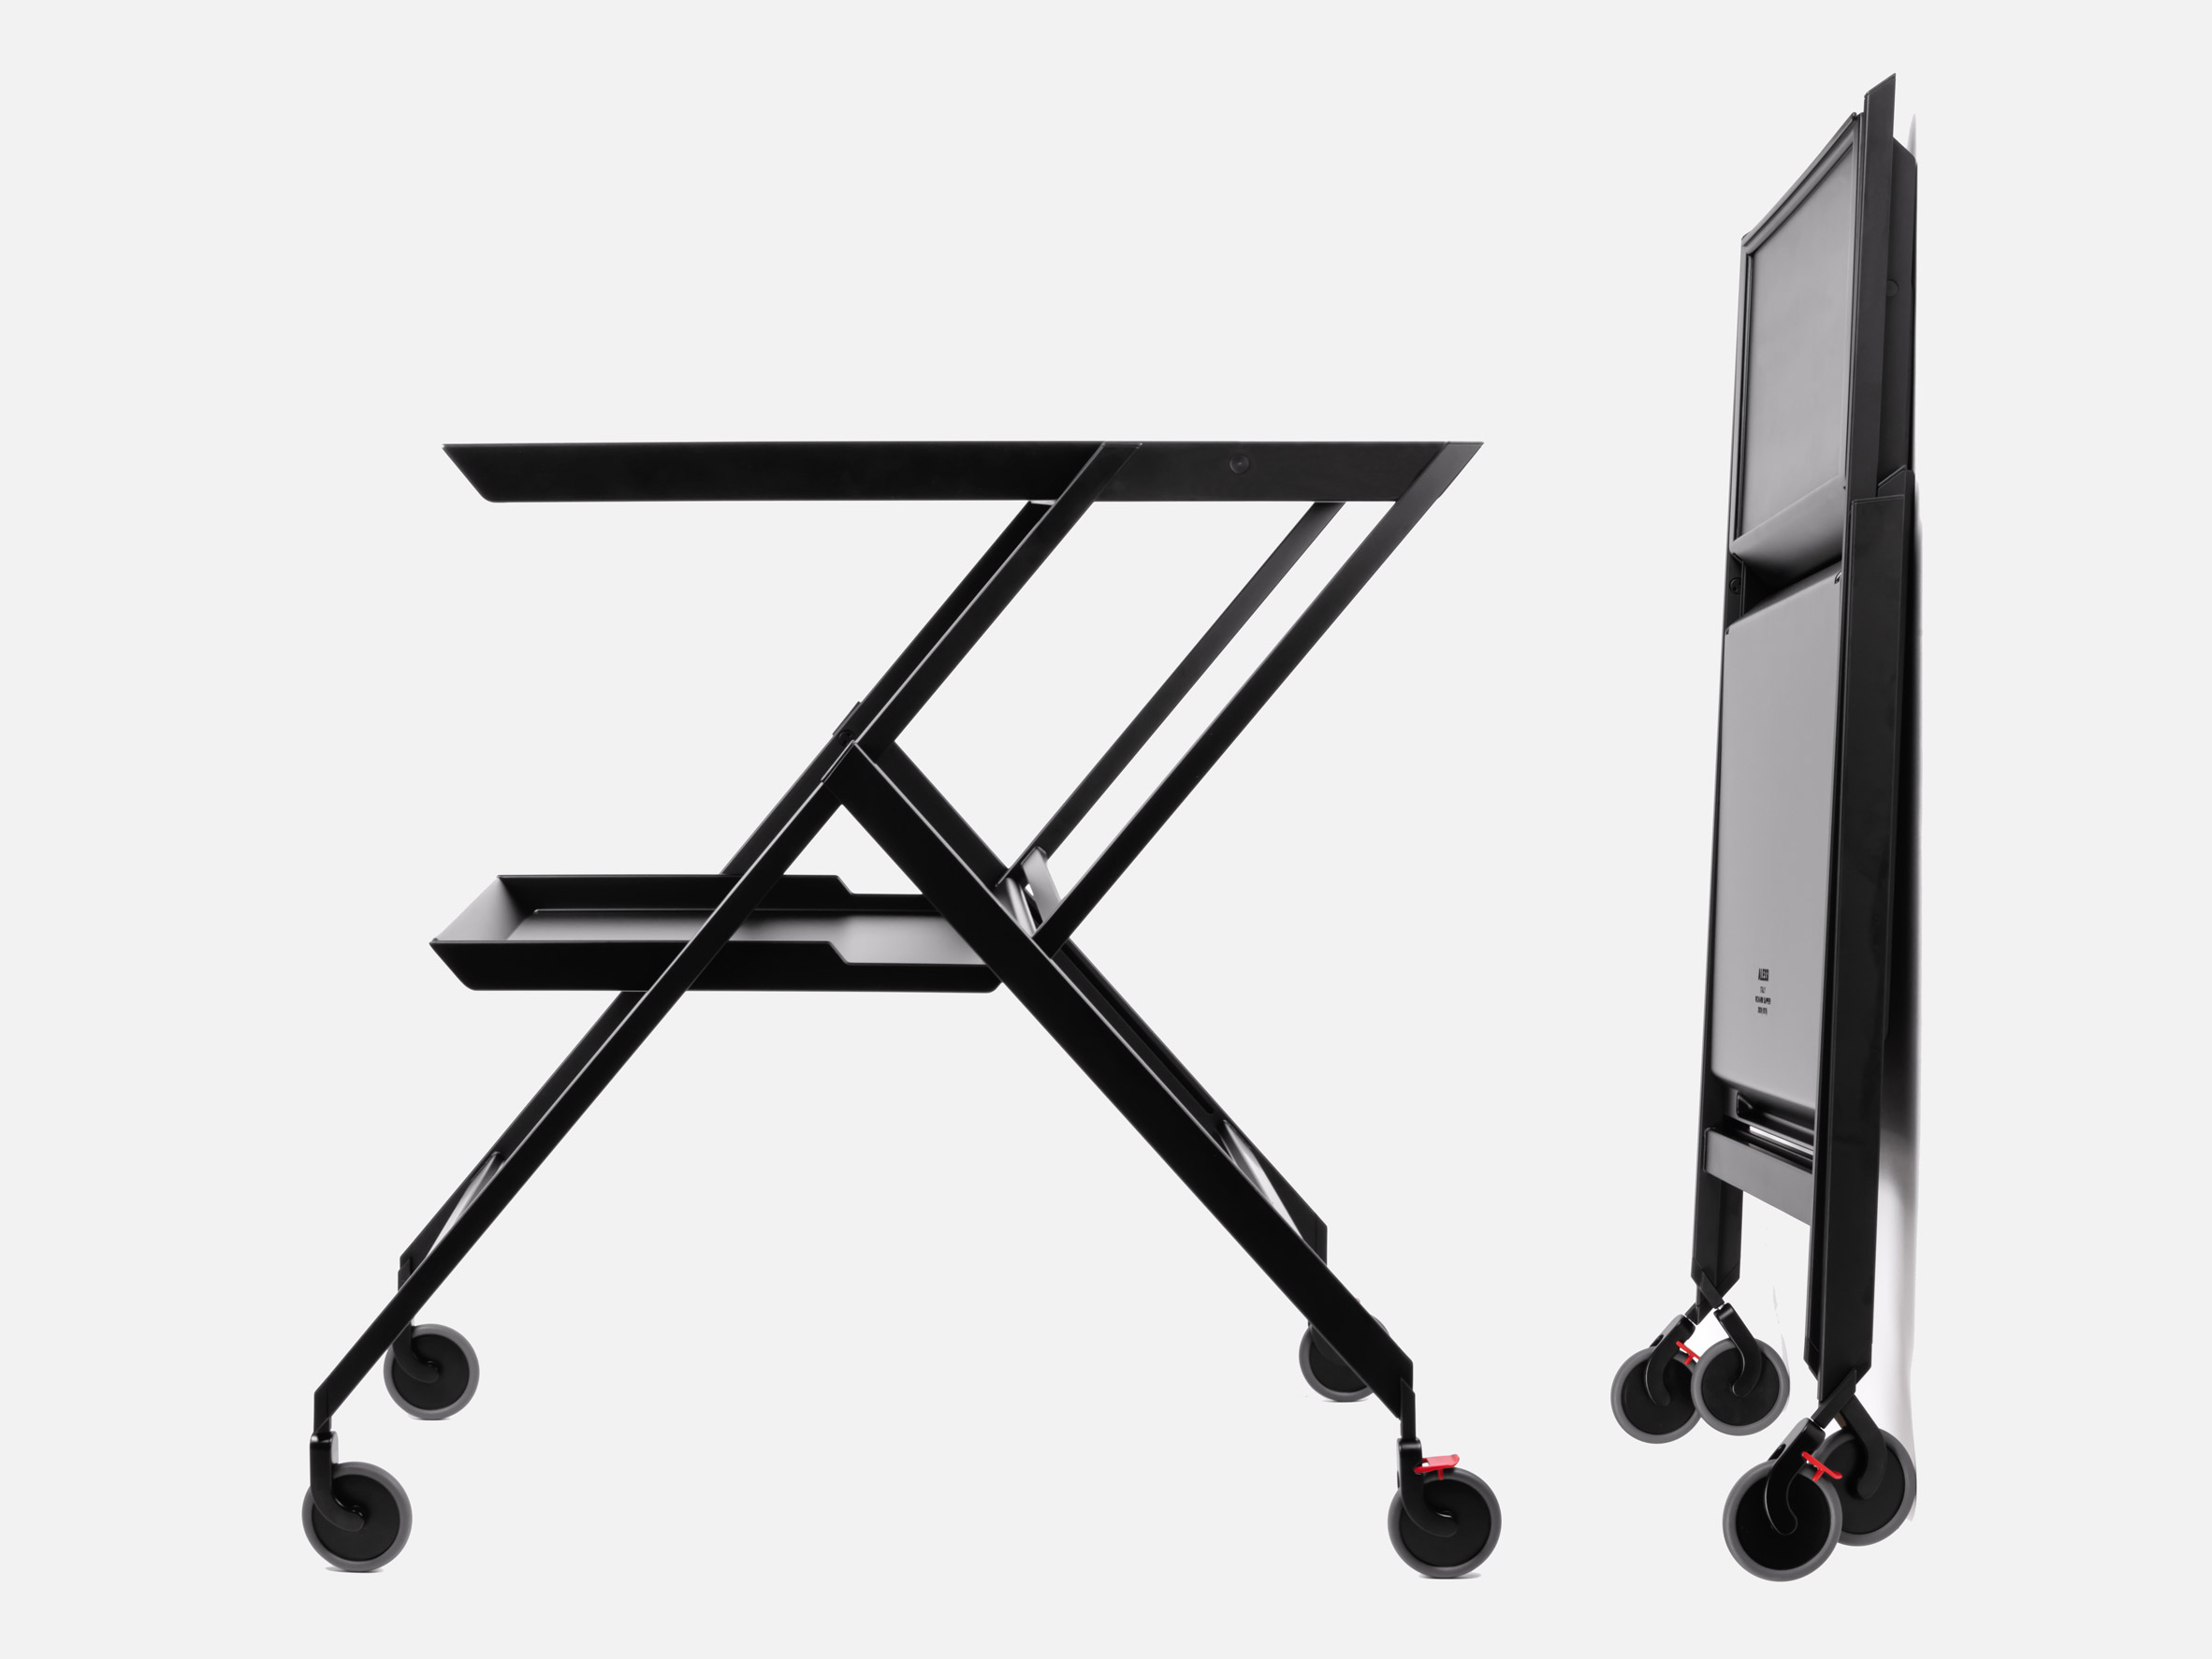 Plico folding trolley and desk by Richard Sapper, reissued by Alessi